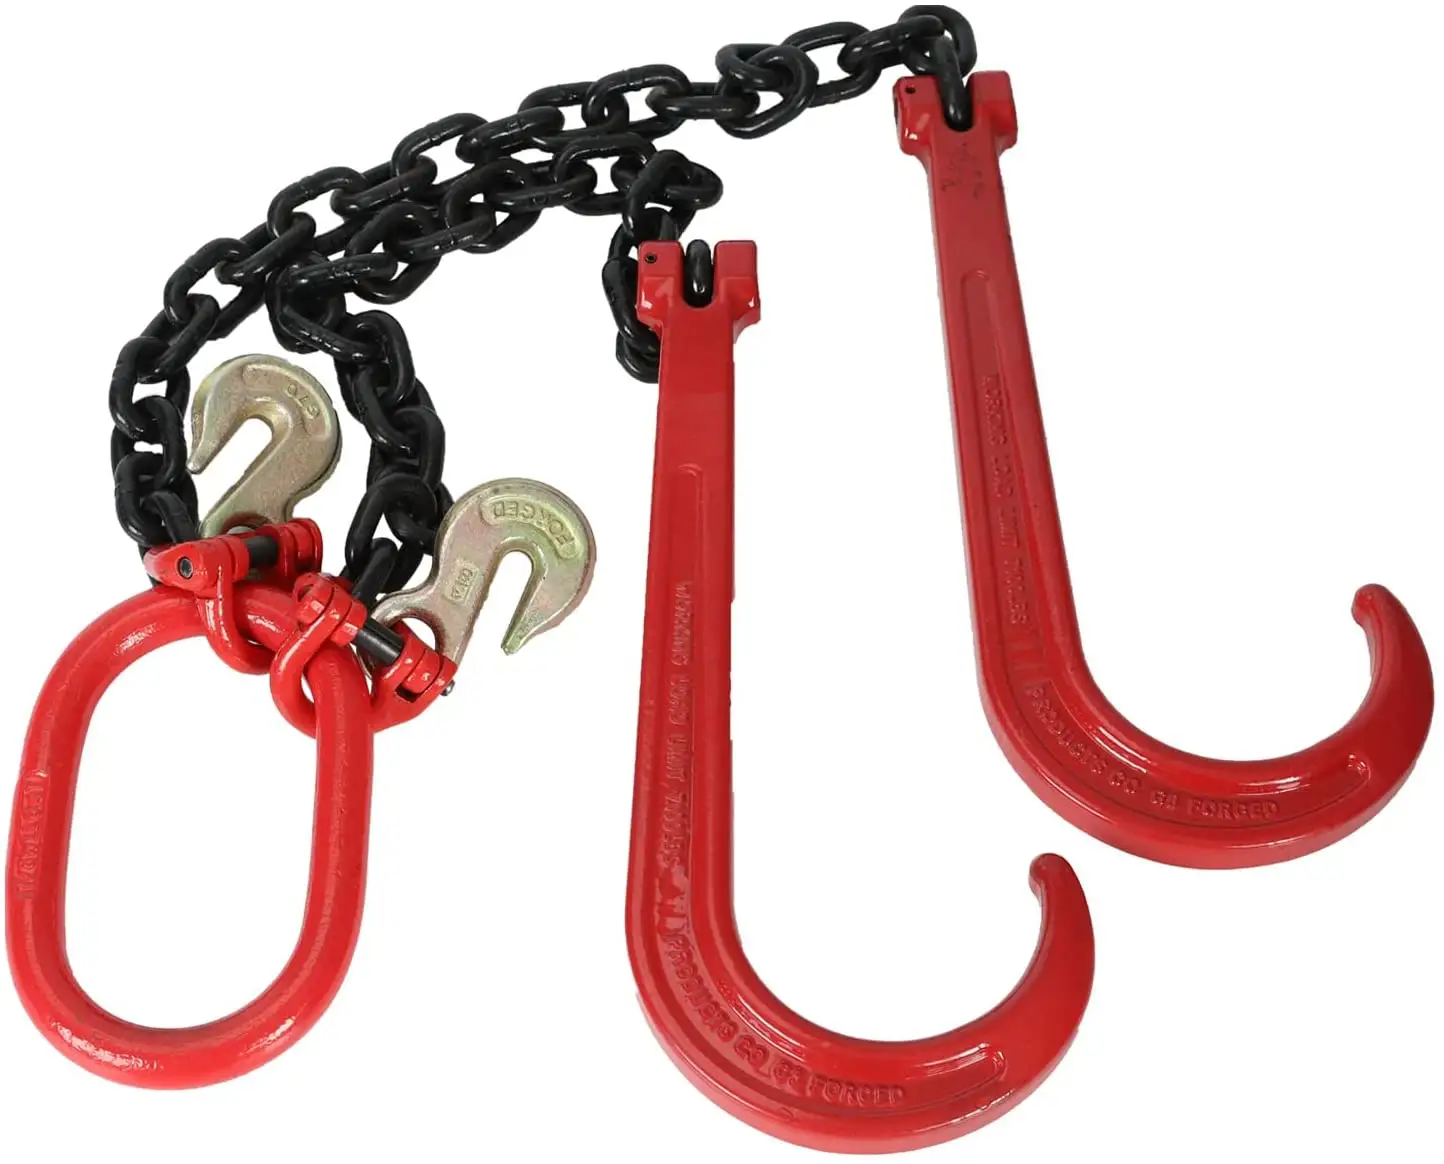 7100 Lbs Safe Working Load G80 Tow Recovery V Chain kits with J-Hook & Eye Cradle Grab Hook